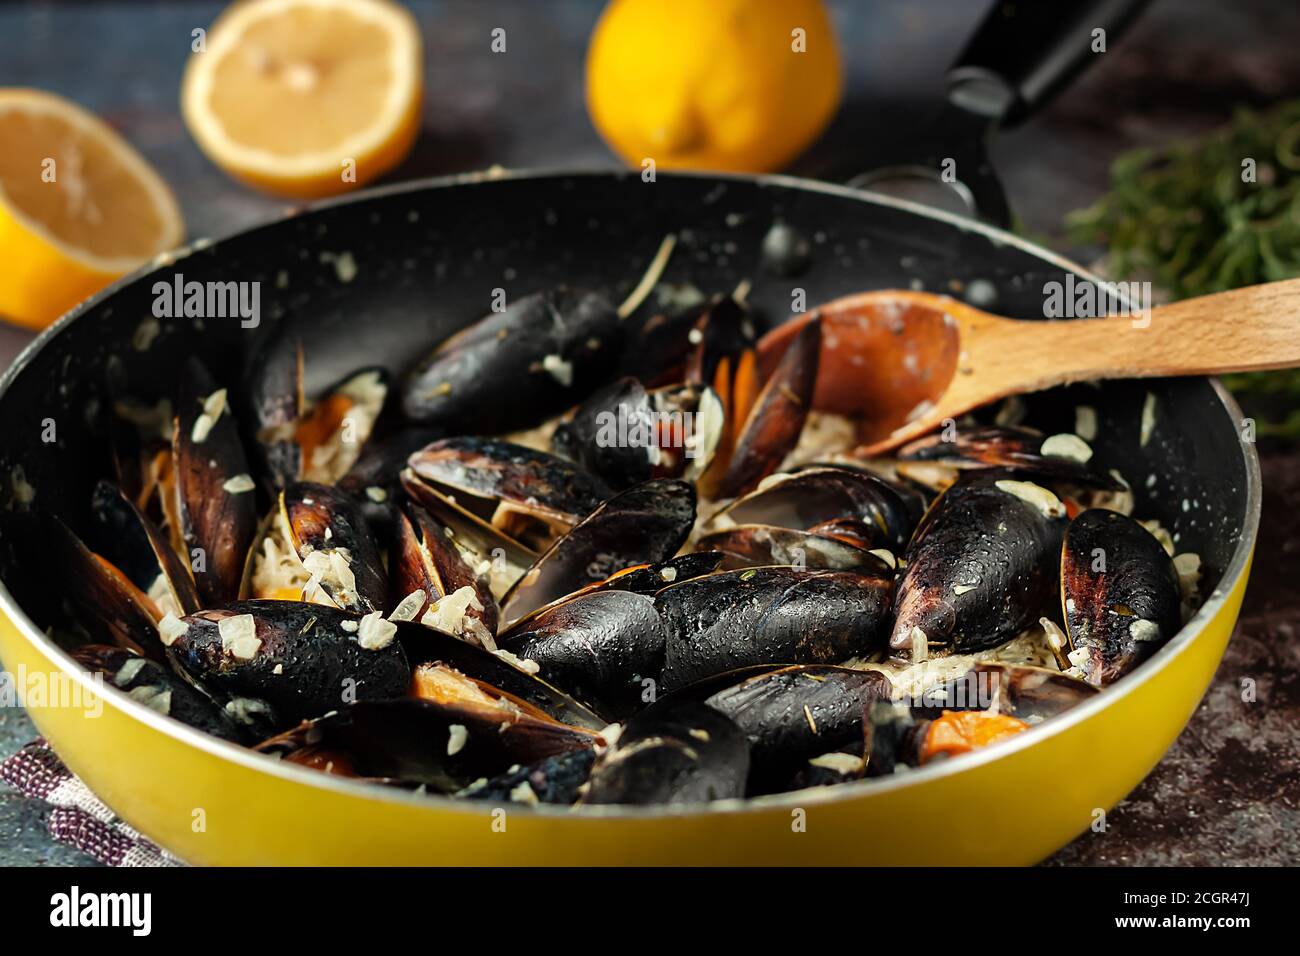 Moules Marinieres - Mussels cooked with white wine sauce. Stock Photo